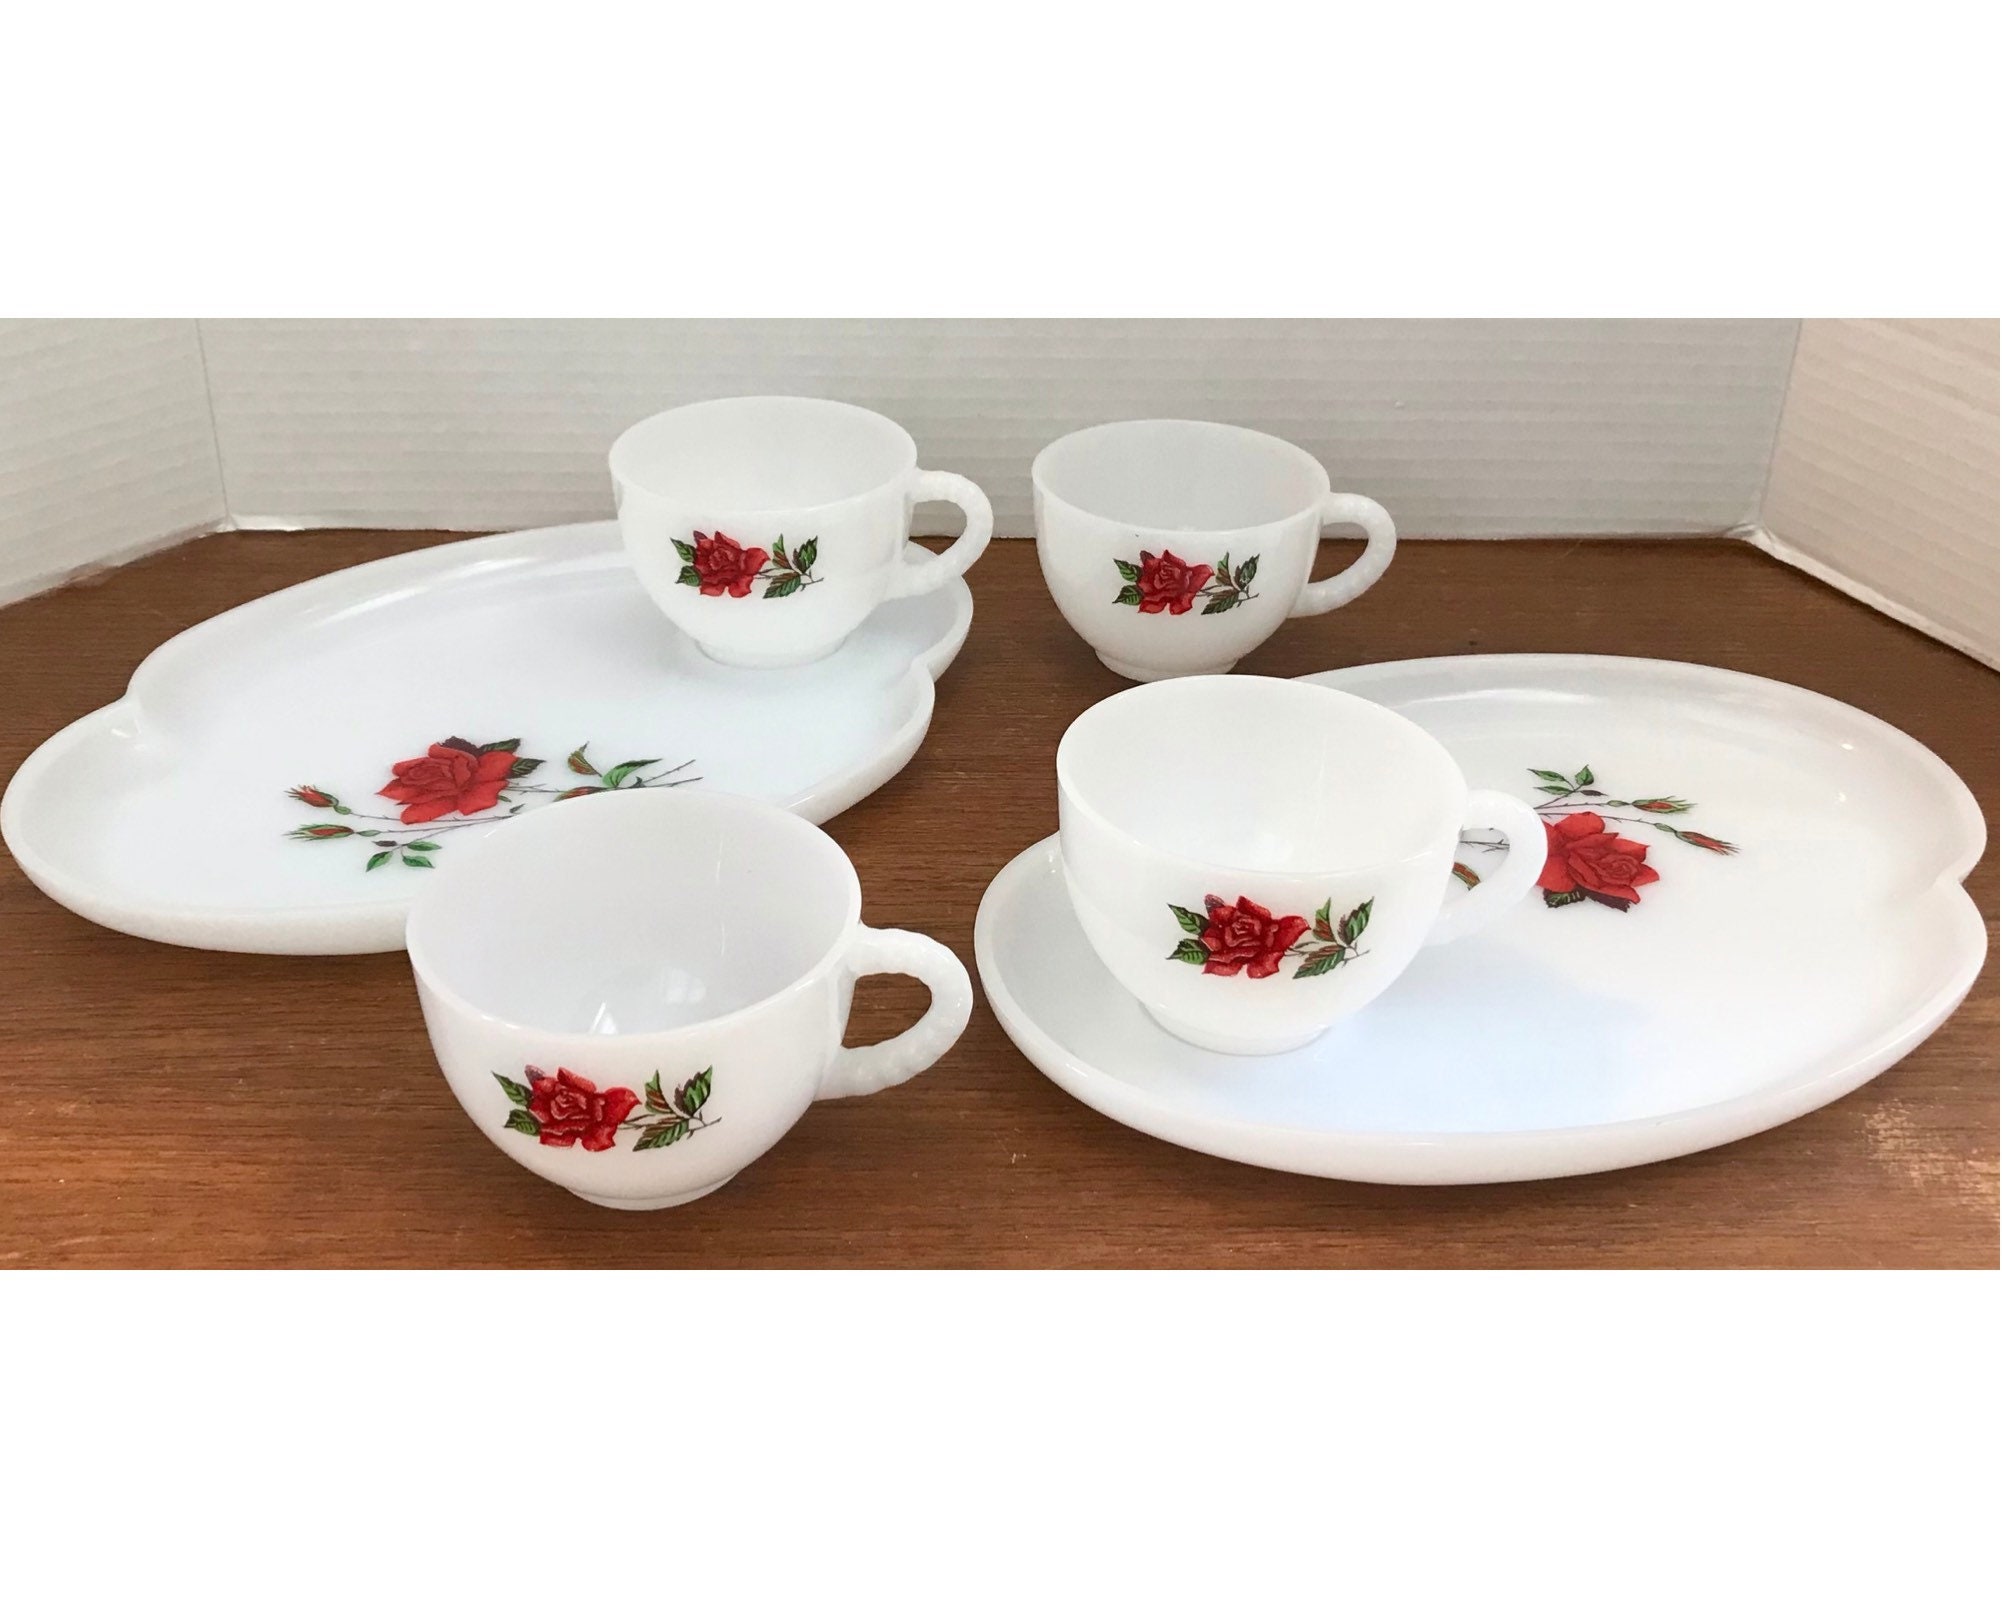 Luncheon Plates and Cups -  Canada